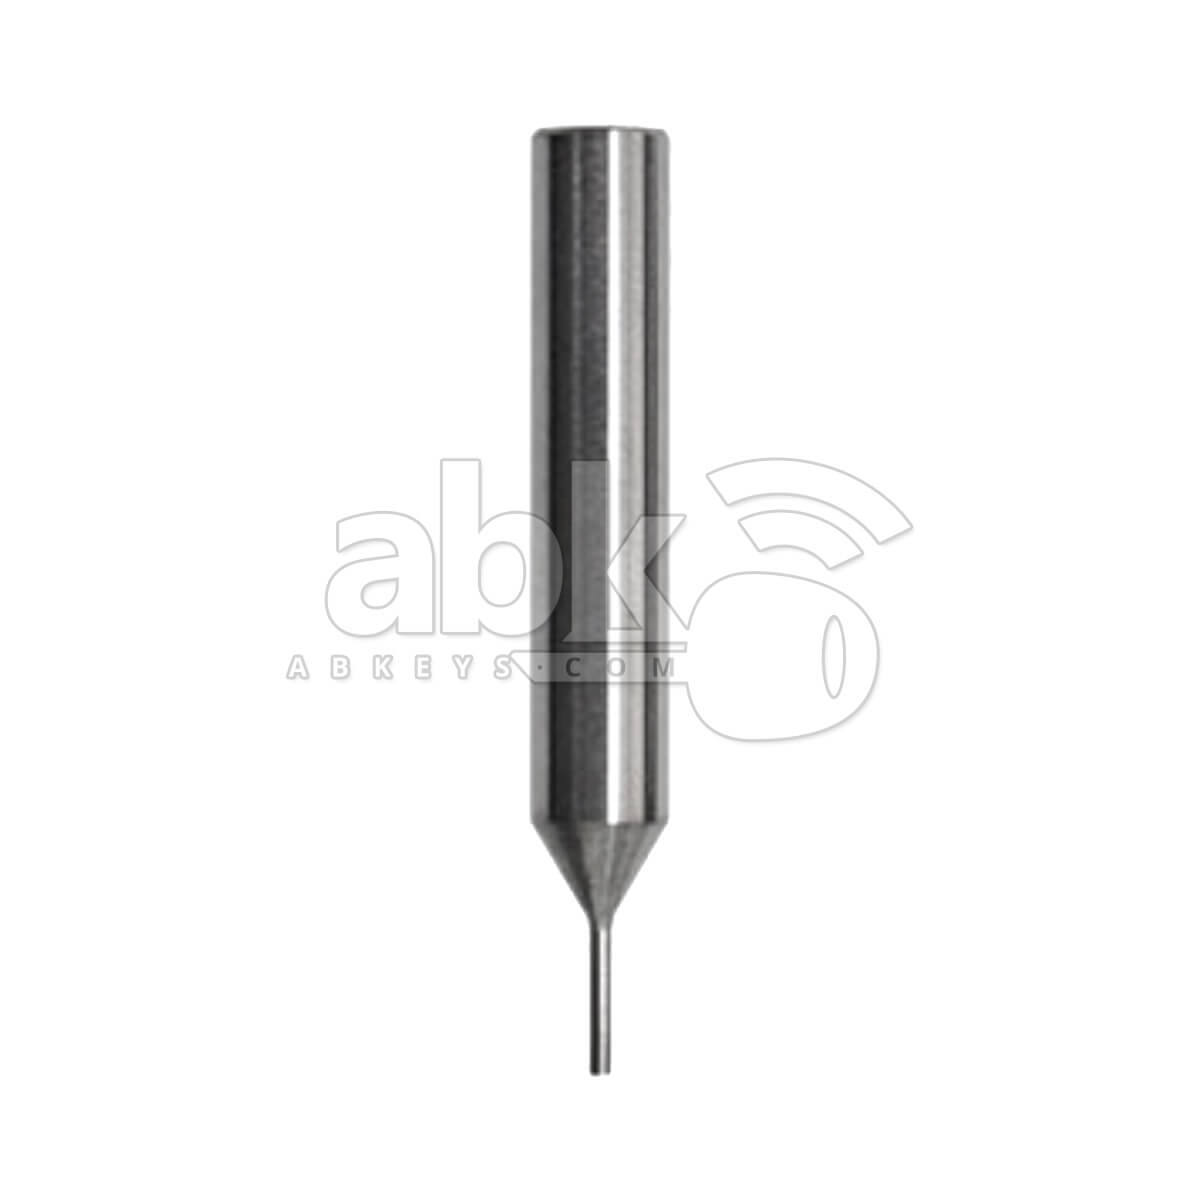 Miracle Decoder 0.5mm For Miracle S10 Key Cutting Machine T40-P05D-45 - ABK-1871 - ABKEYS.COM